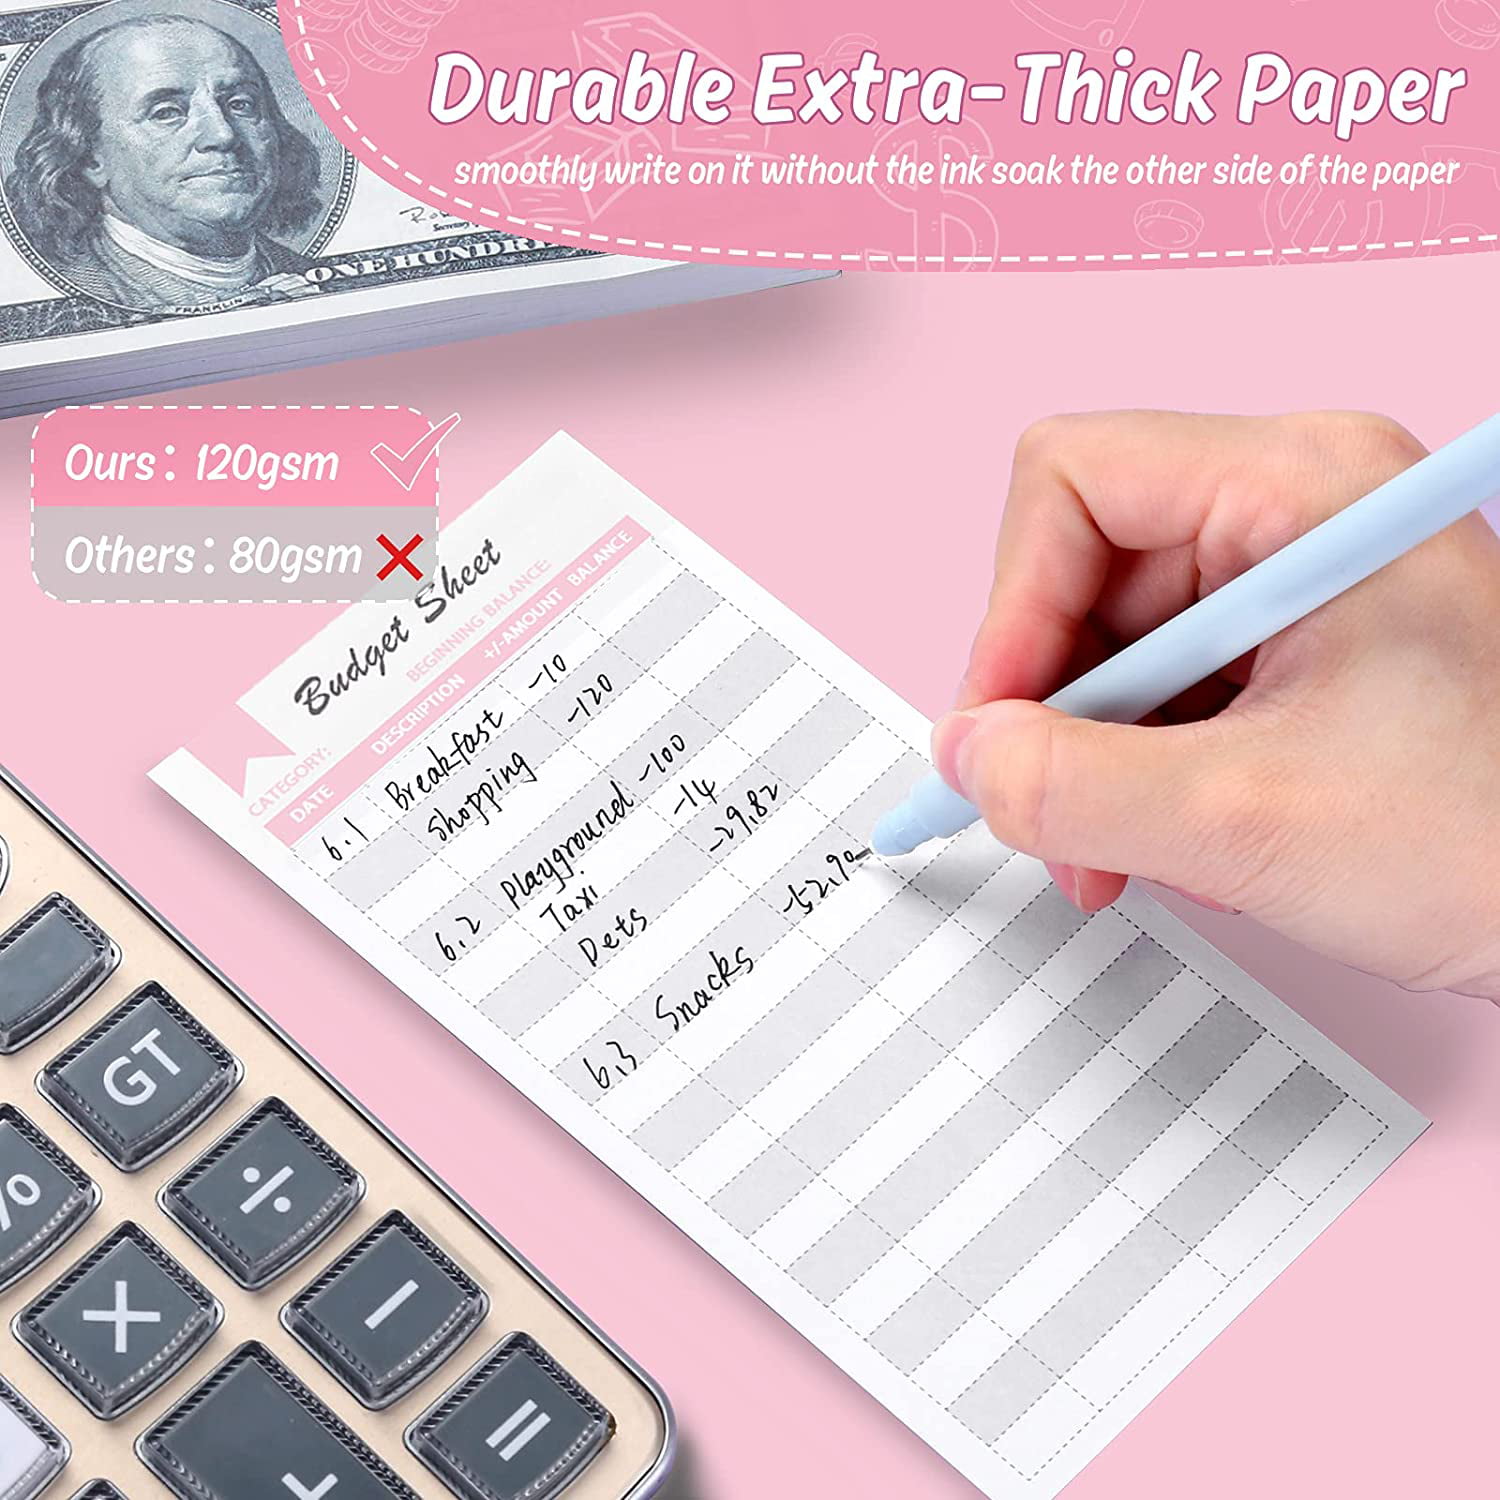  PATIKIL A6 Budget Sheets, 12 Pack 6-Hole Expense Tracker Money  Tracking Sheet for Budgeting Cash Envelope Planner Wallet, Assorted Colors  : Office Products